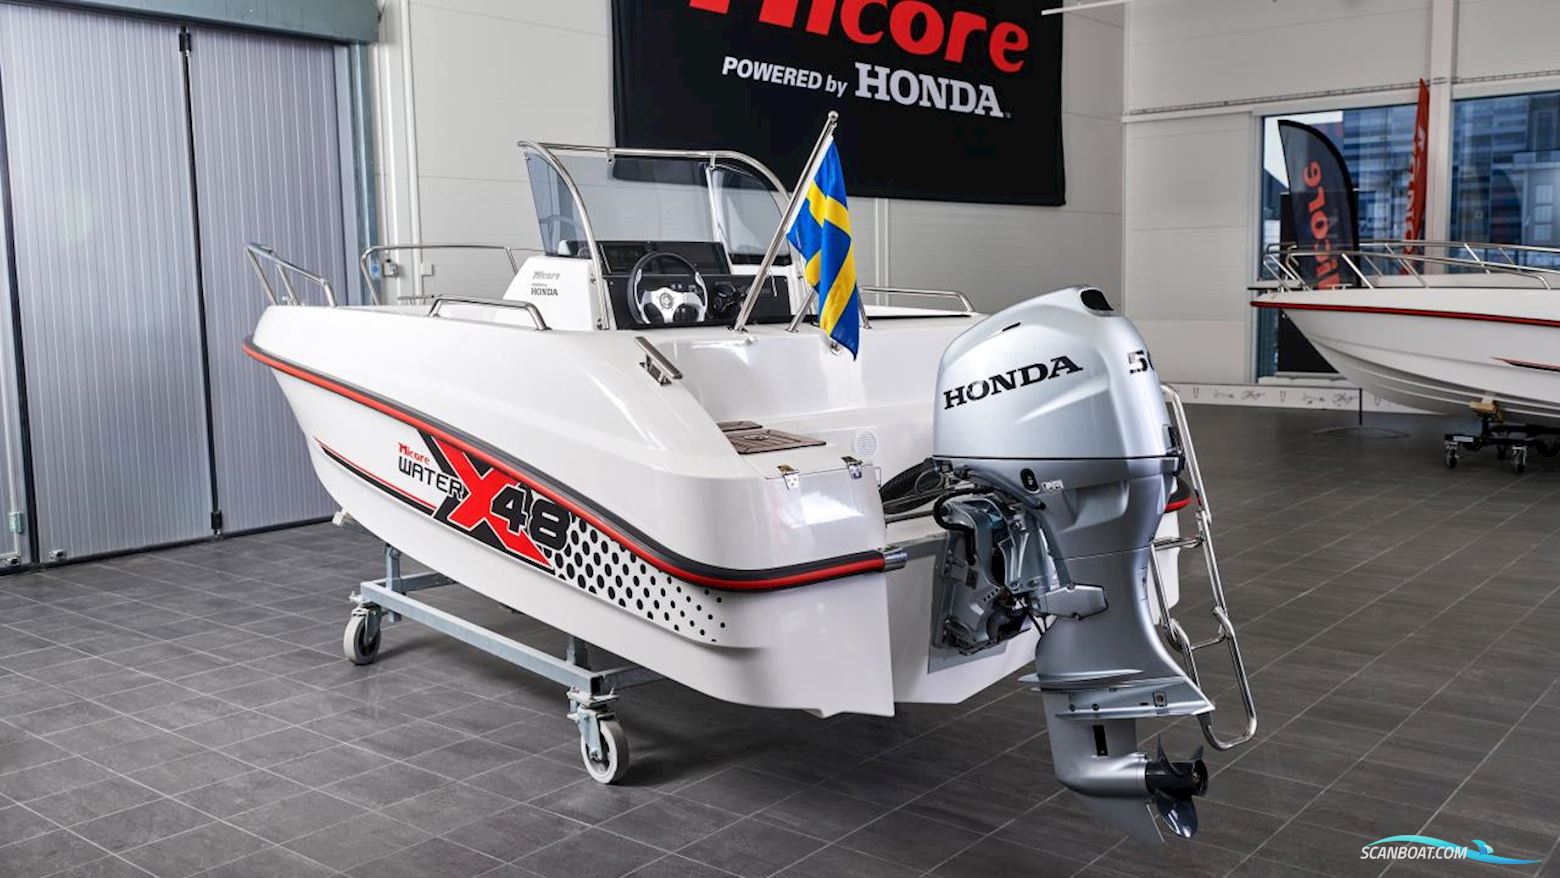 Micore Xw48sc Motor boat 2022, with Honda engine, Sweden